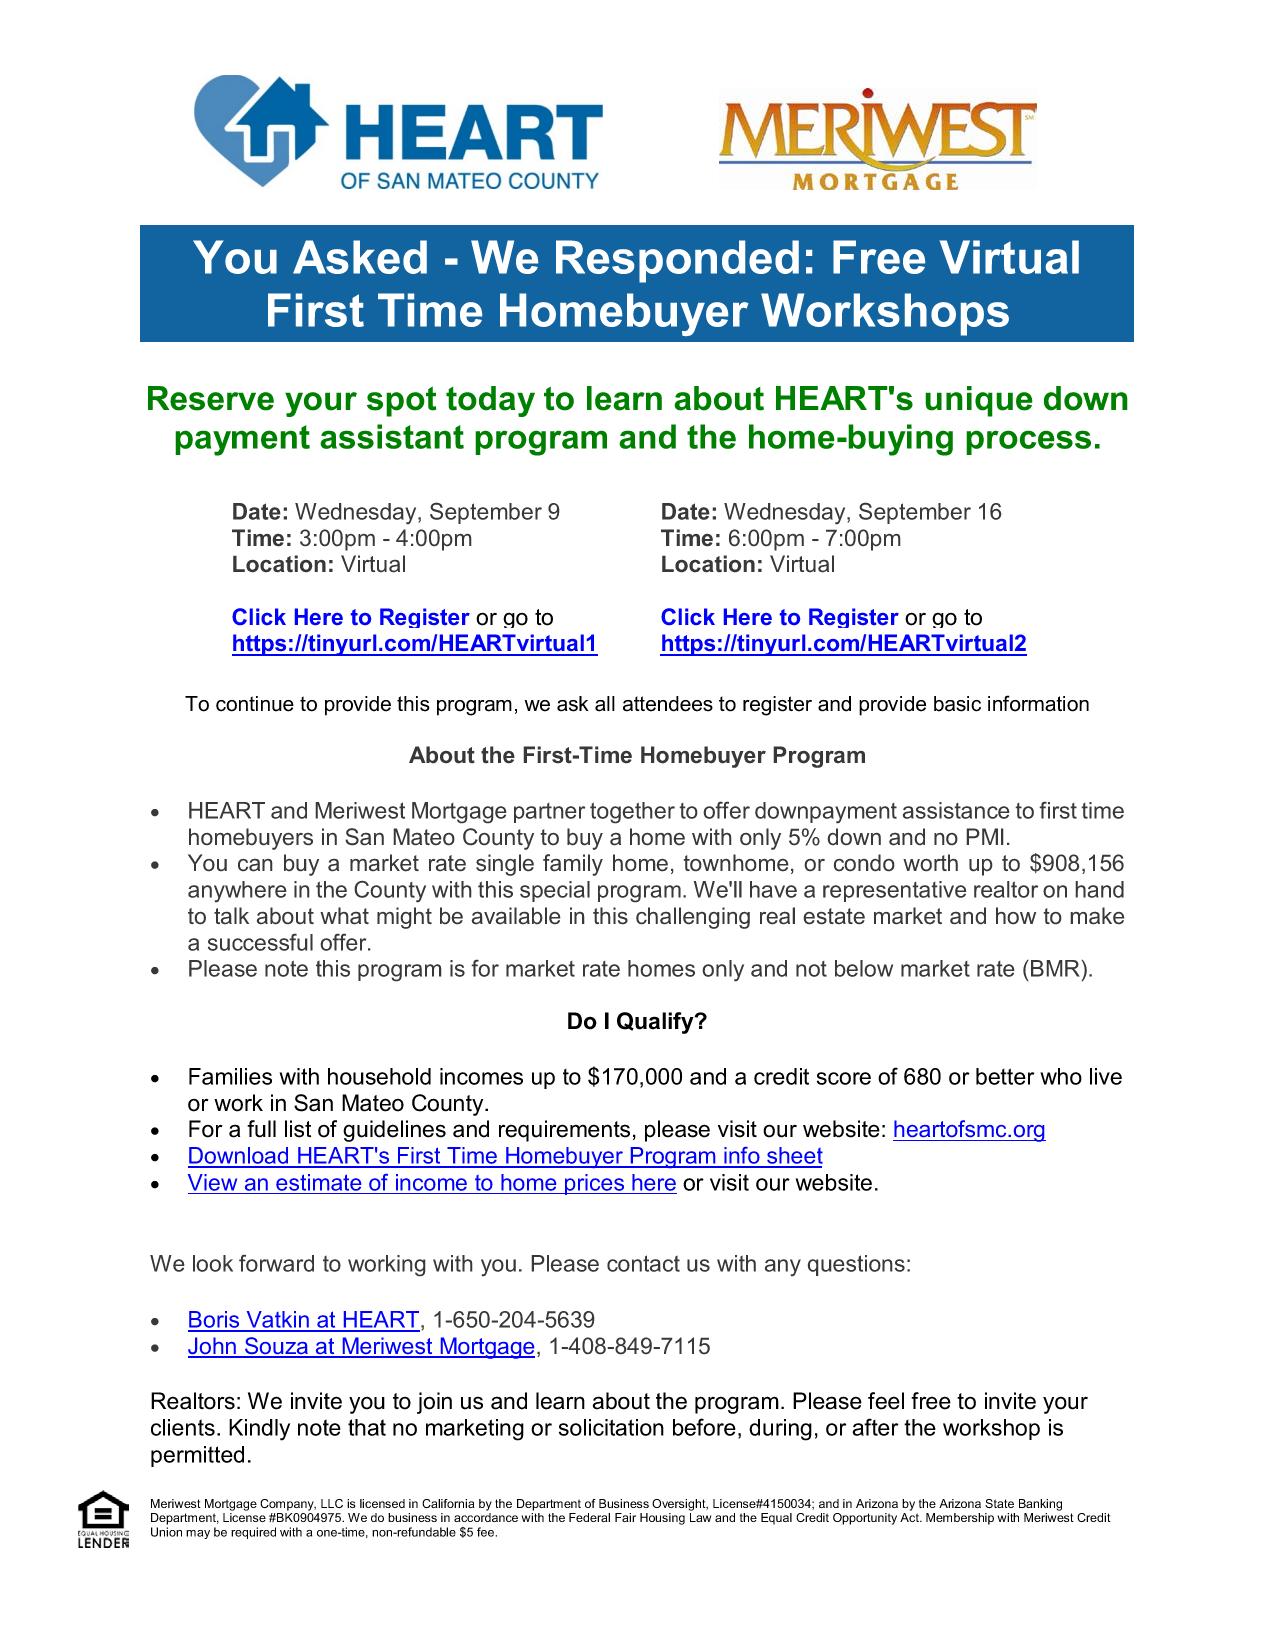 Flyer of the free virtual first time homebuyer workshops